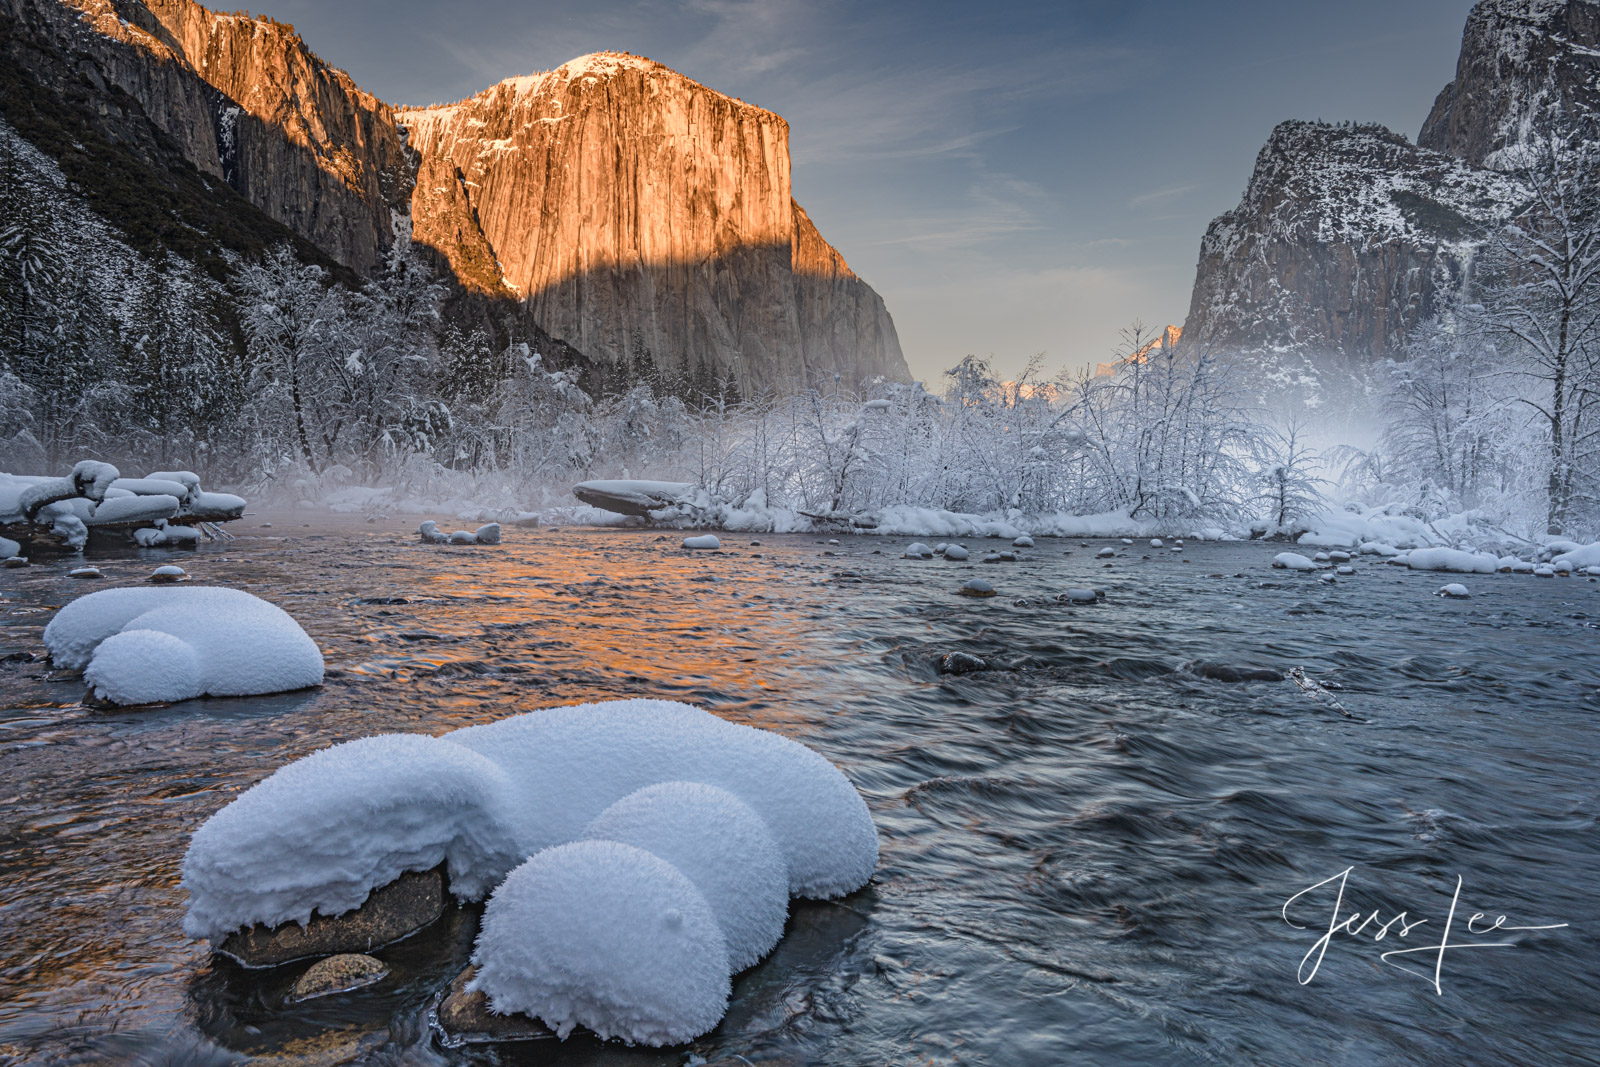 1 of 200 California Landscape Prints of a Winter Evening in Yosemite valley. This is part of the luxurious collection of fine...